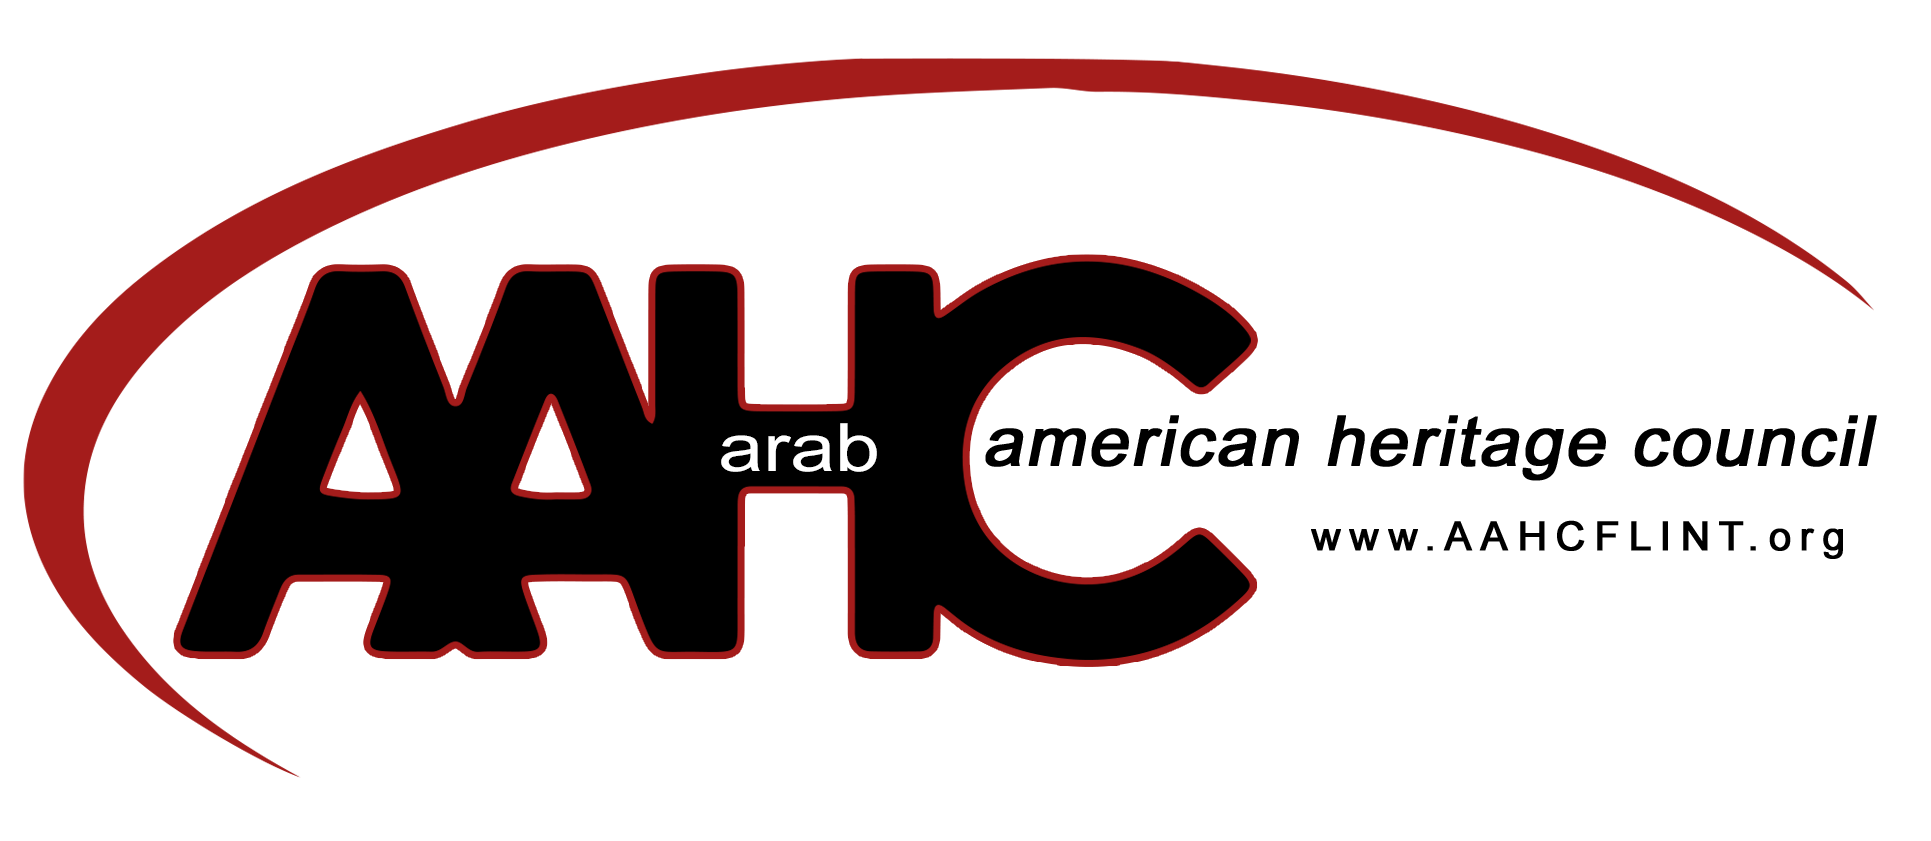 The official AAHC website